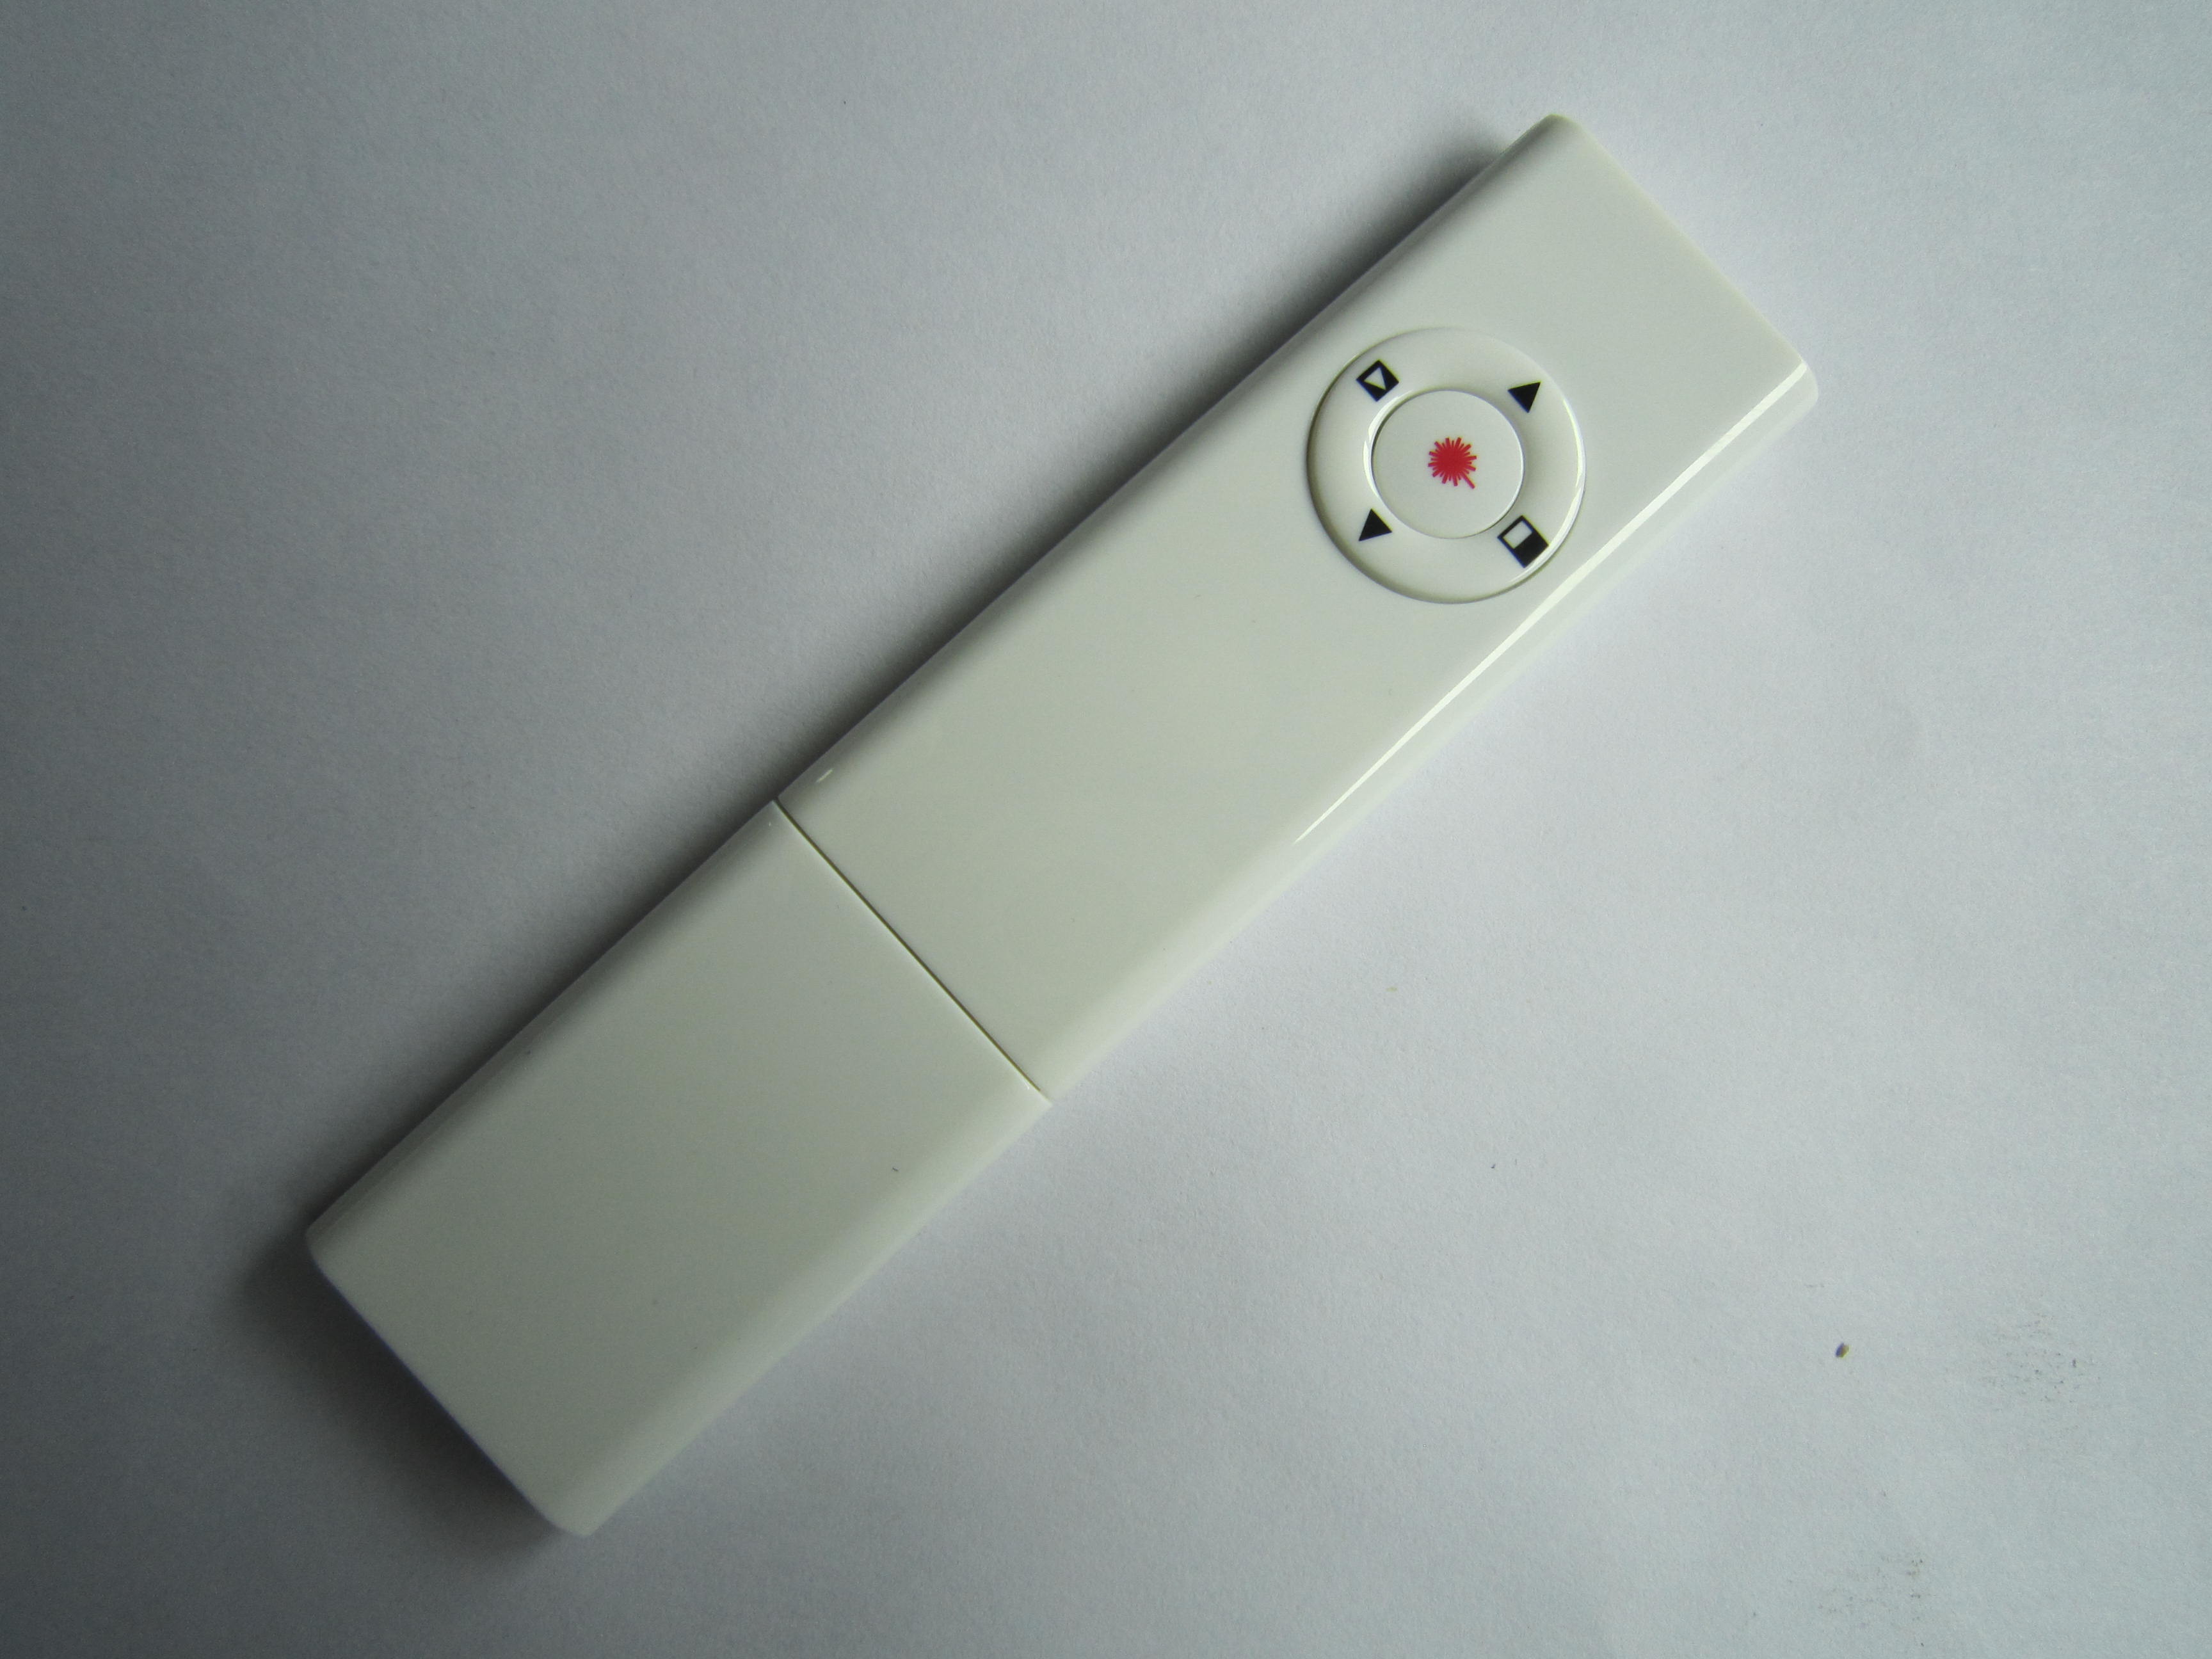 HDW-RS012 Wireless presenter with laser pointer